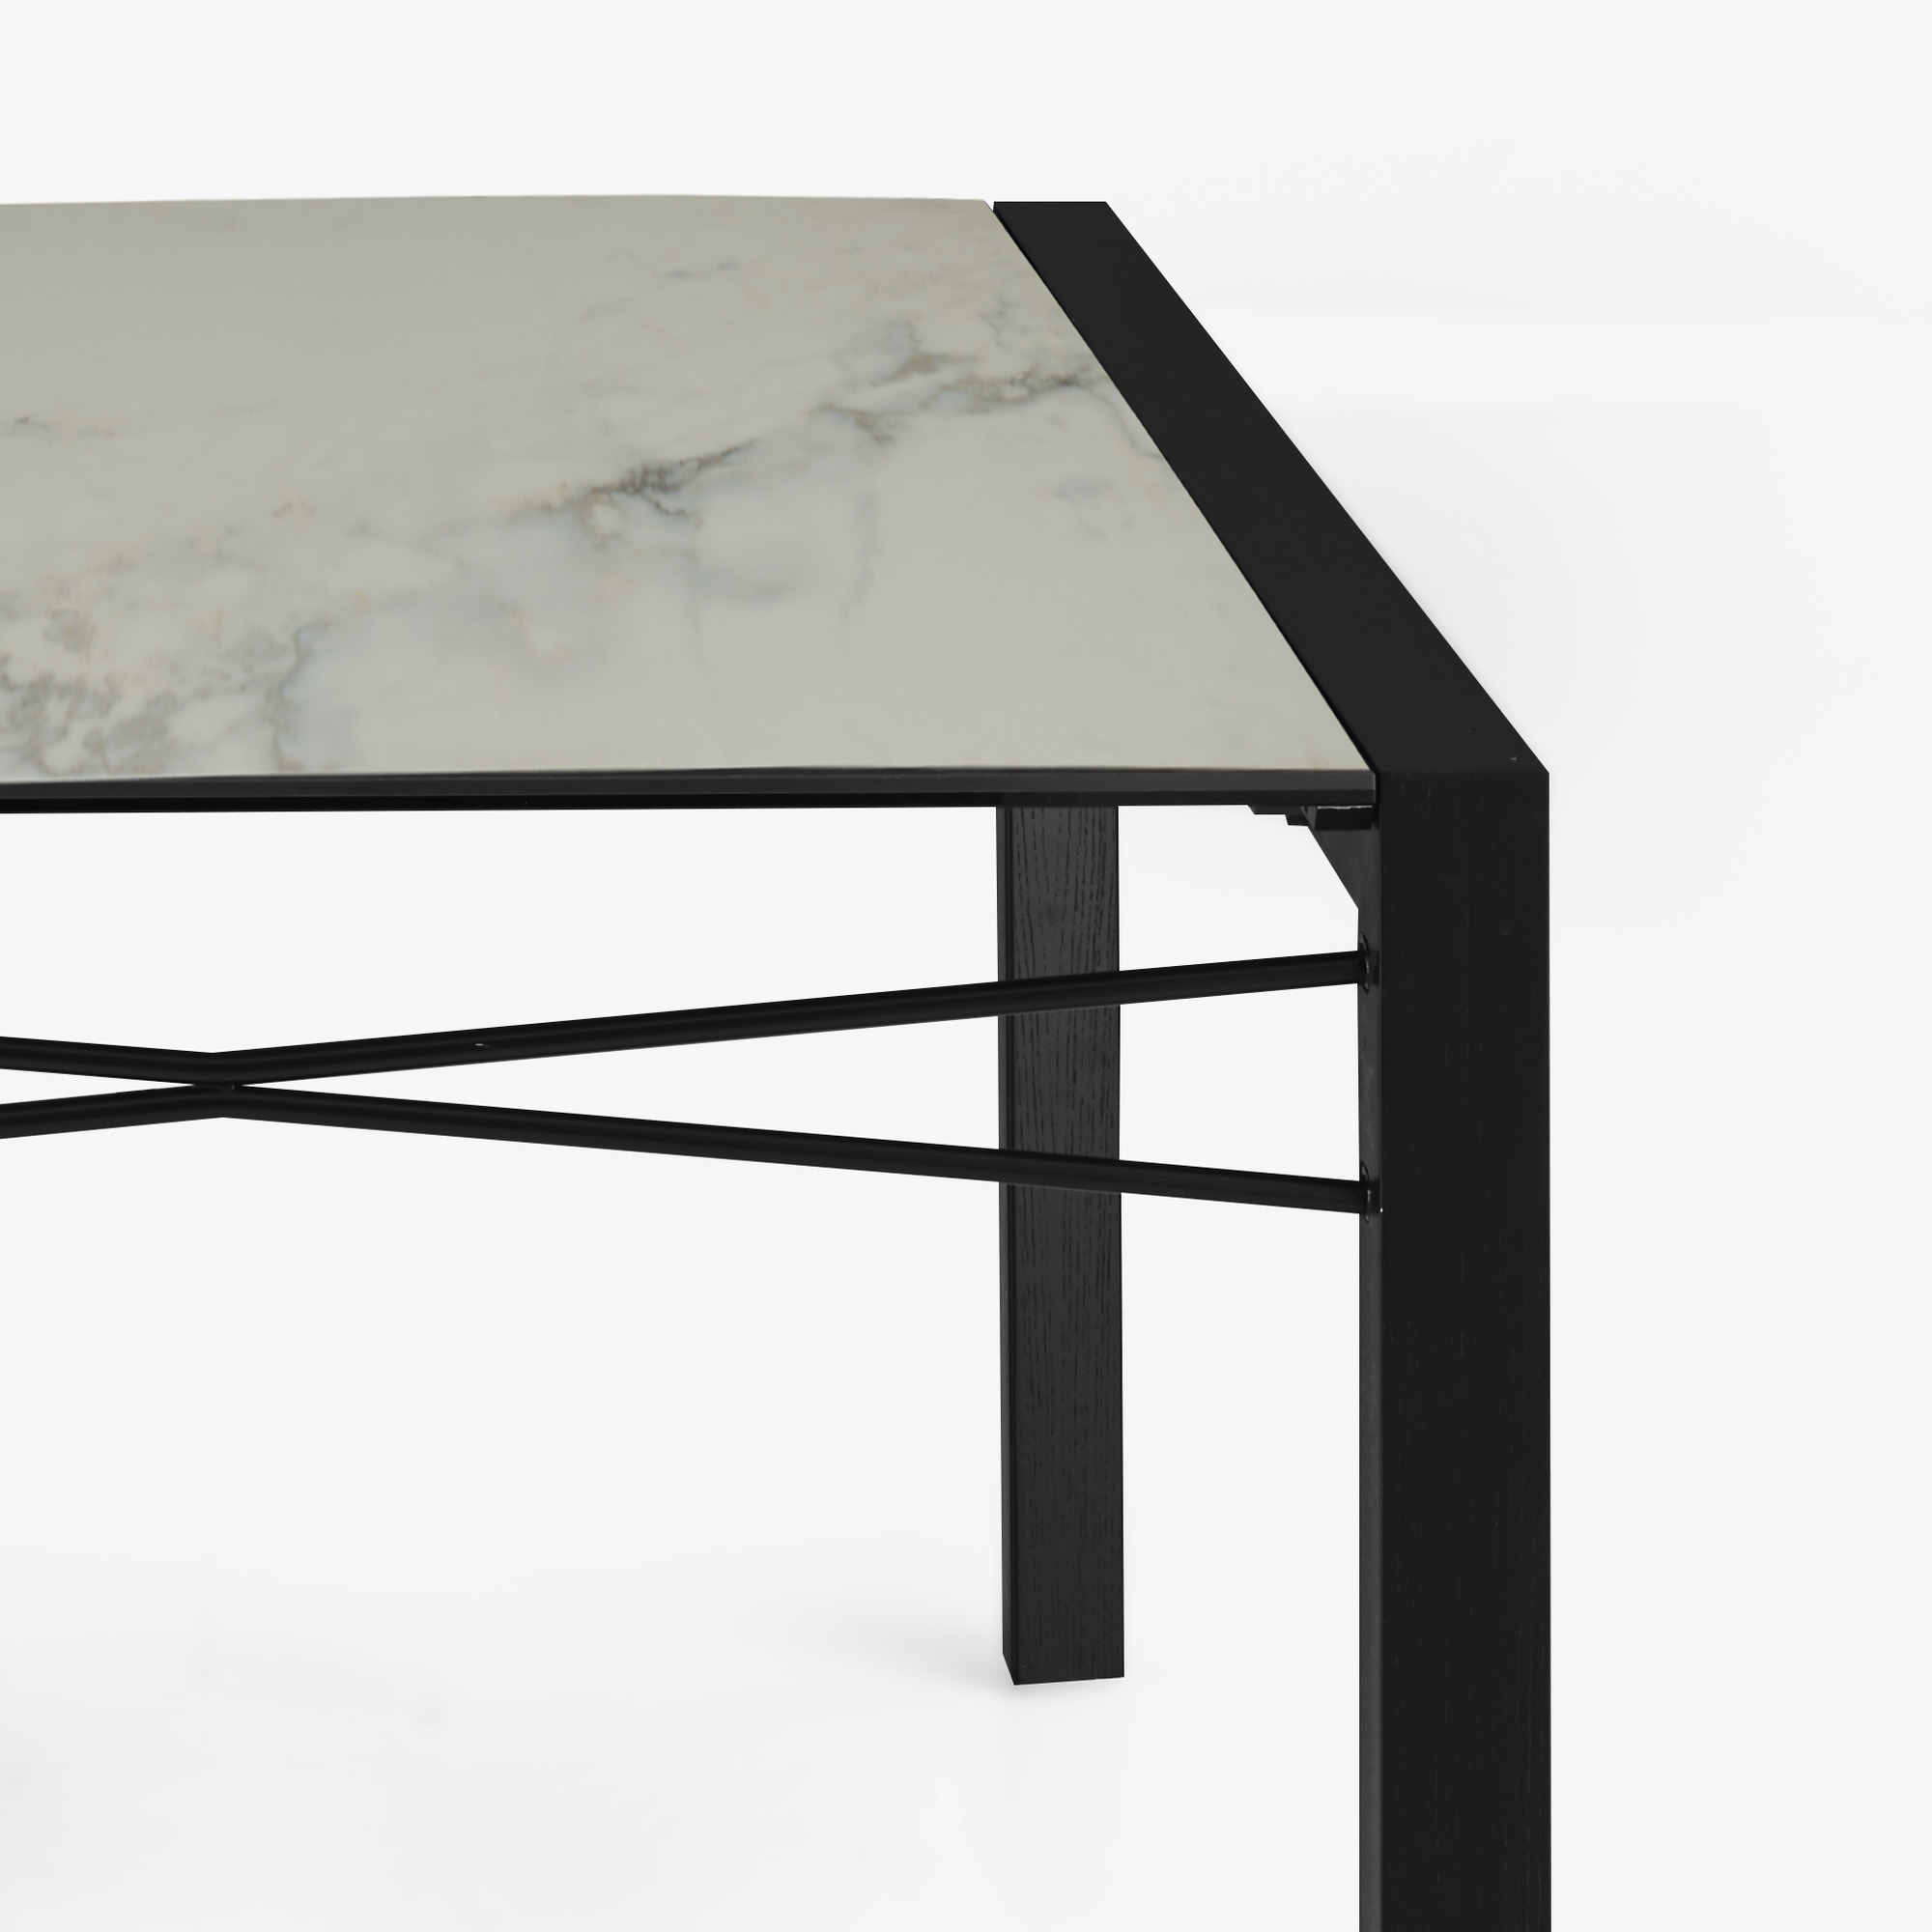 Image Dining table top in white marble-effect ceramic stoneware base in black stained ash 6